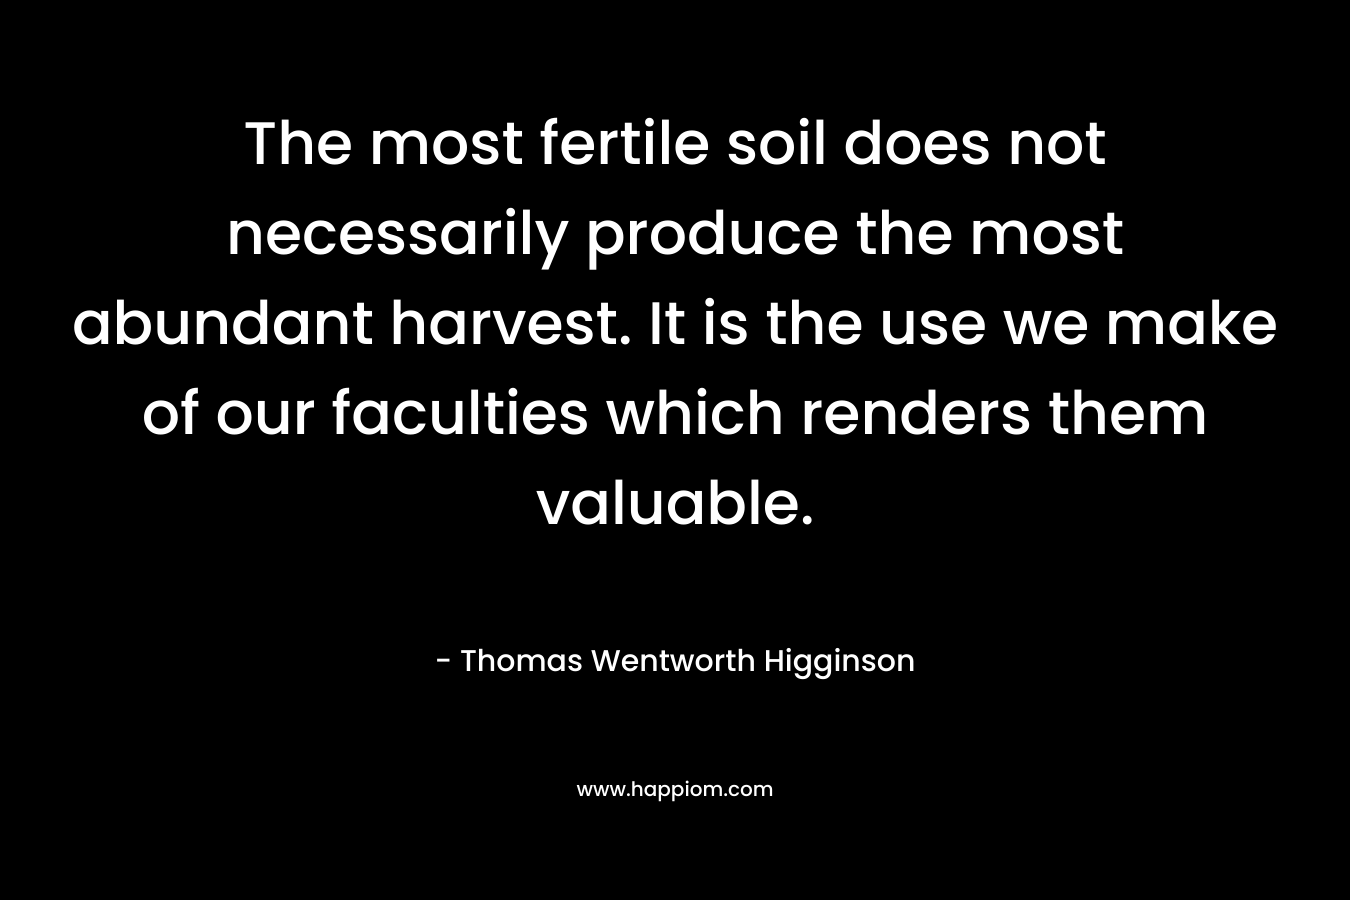 The most fertile soil does not necessarily produce the most abundant harvest. It is the use we make of our faculties which renders them valuable. – Thomas Wentworth Higginson